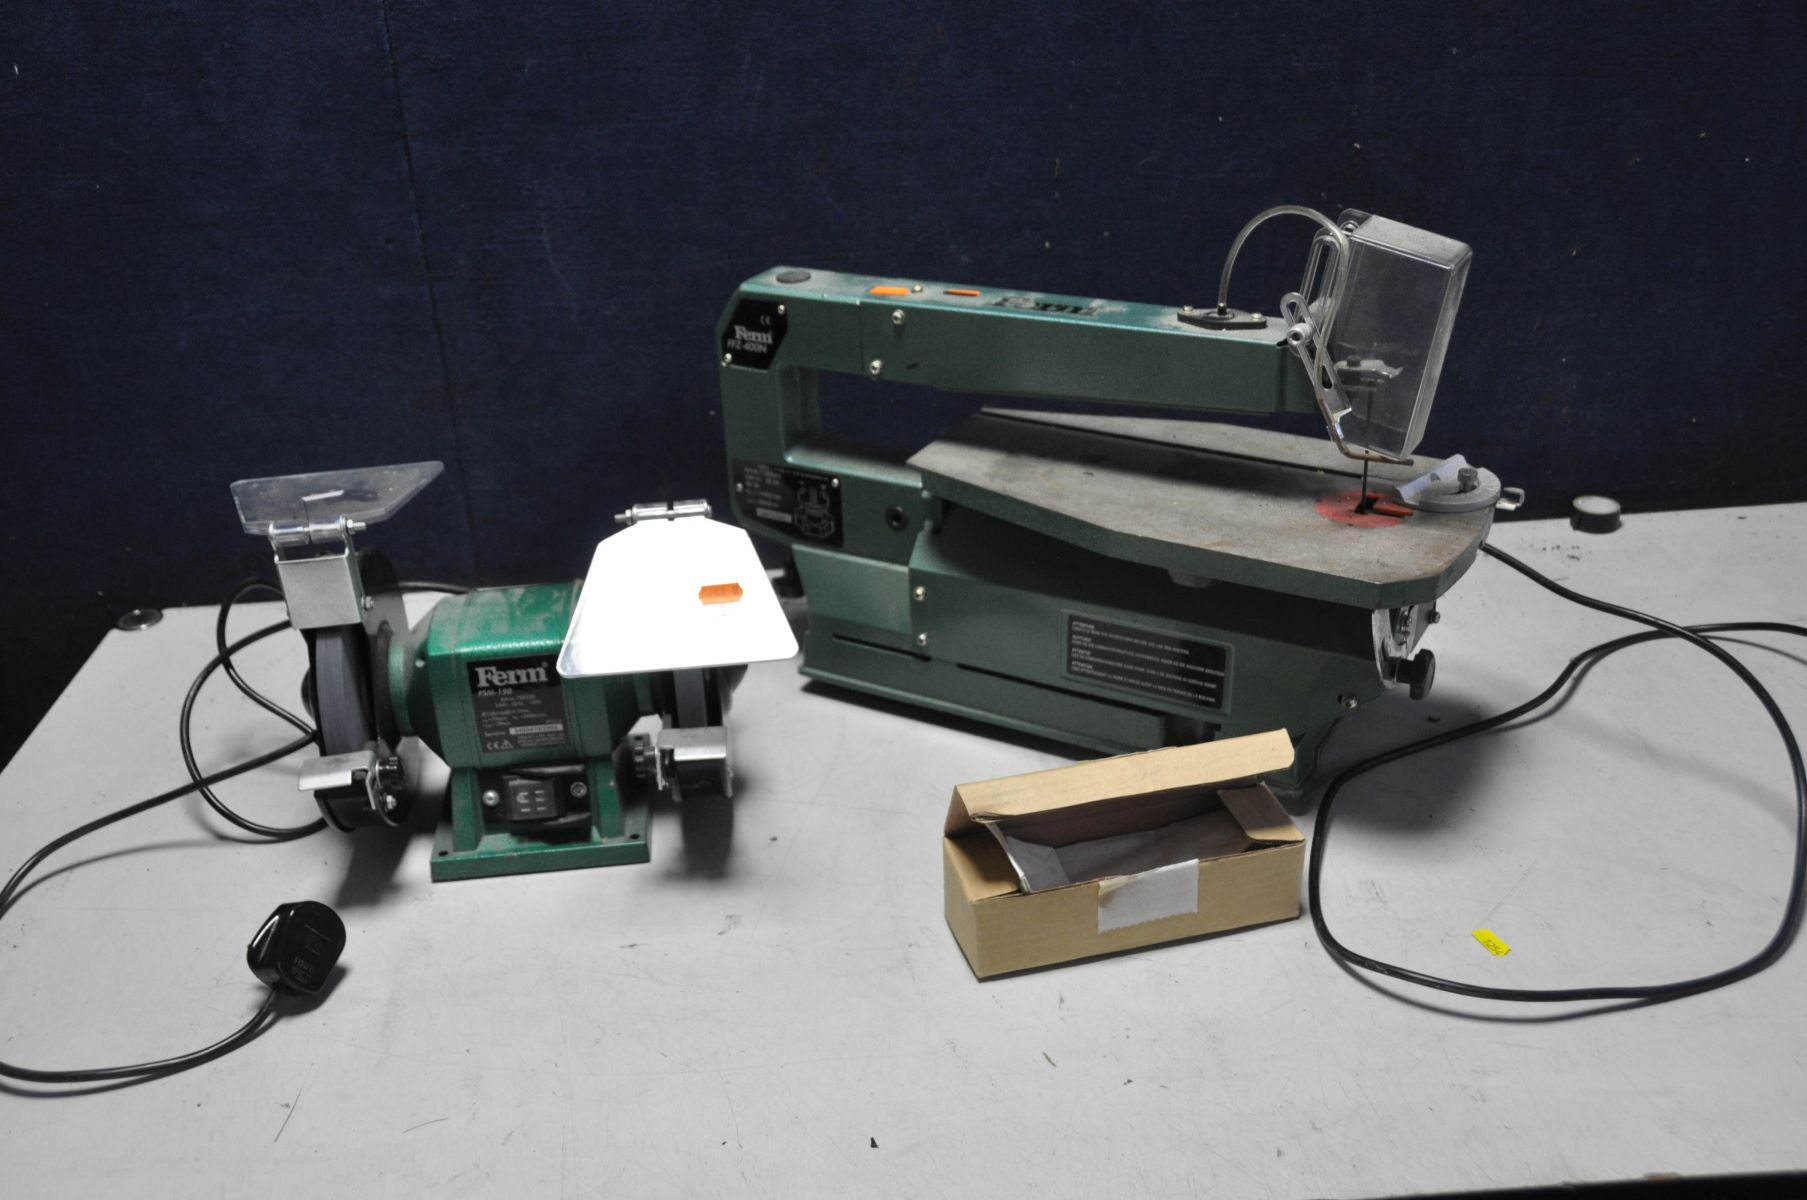 A FERM FFZ400N SCROLL SAW with a box of spare blade and mitre guide along with a Ferm FSM150 bench